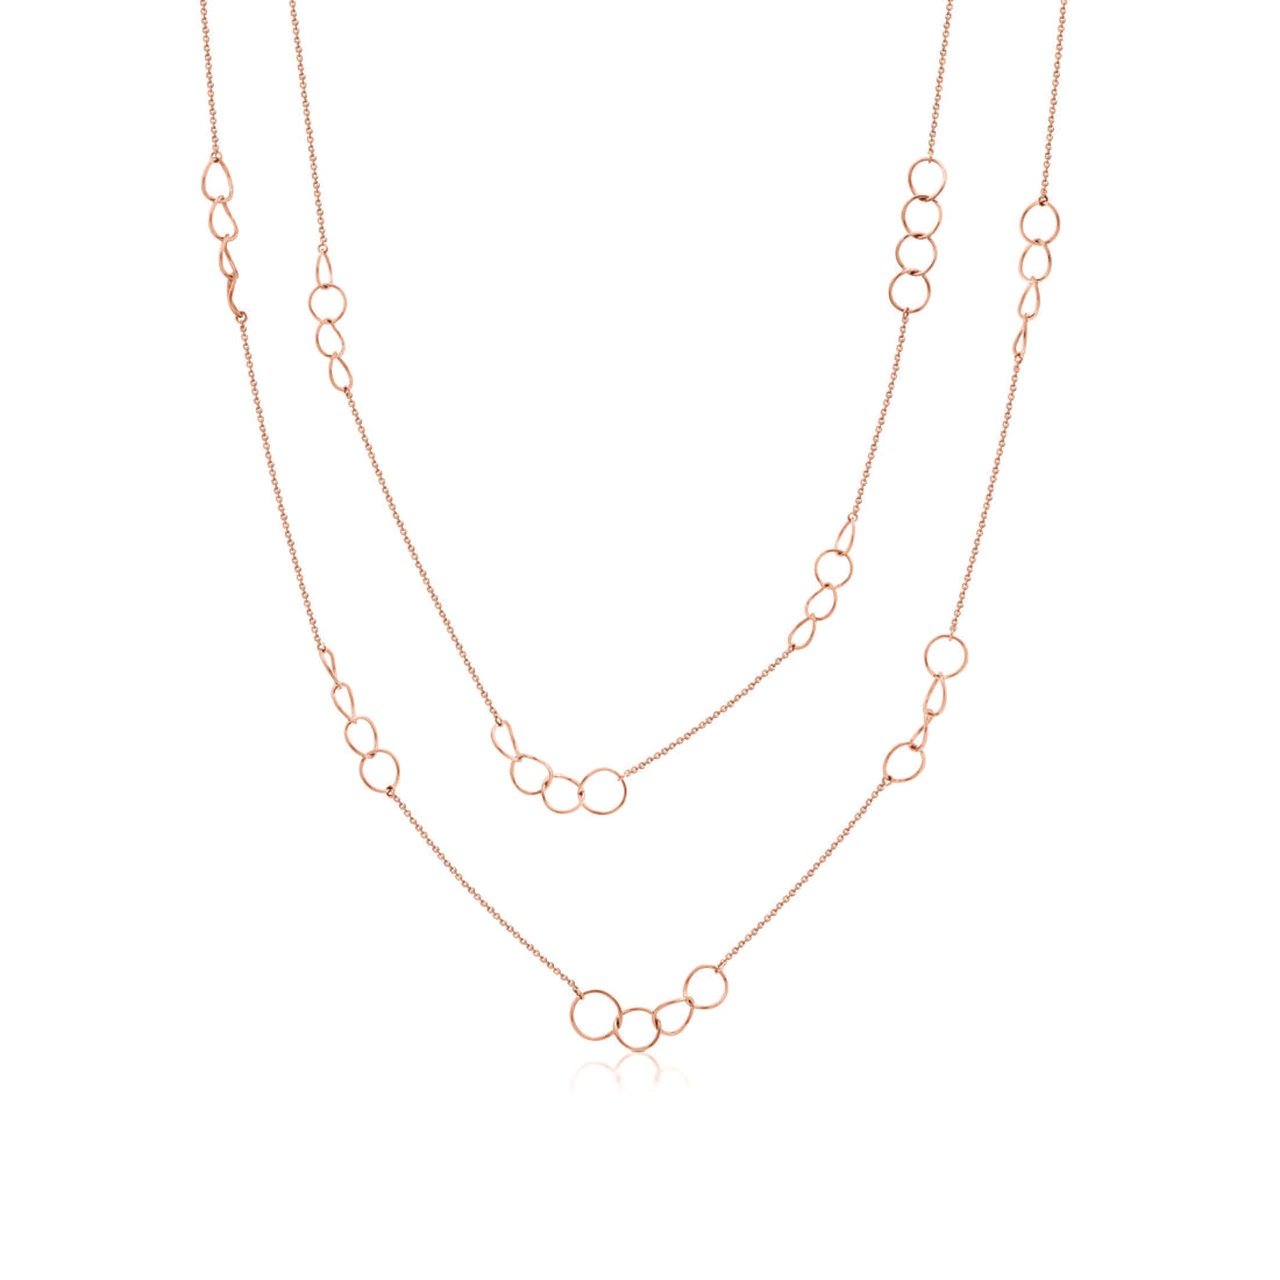 Romi Dublin Rose Gold Circle Necklace  Simple and understated this collection has a contemporary and sleek look that will allow you to accessorise with any outfit.